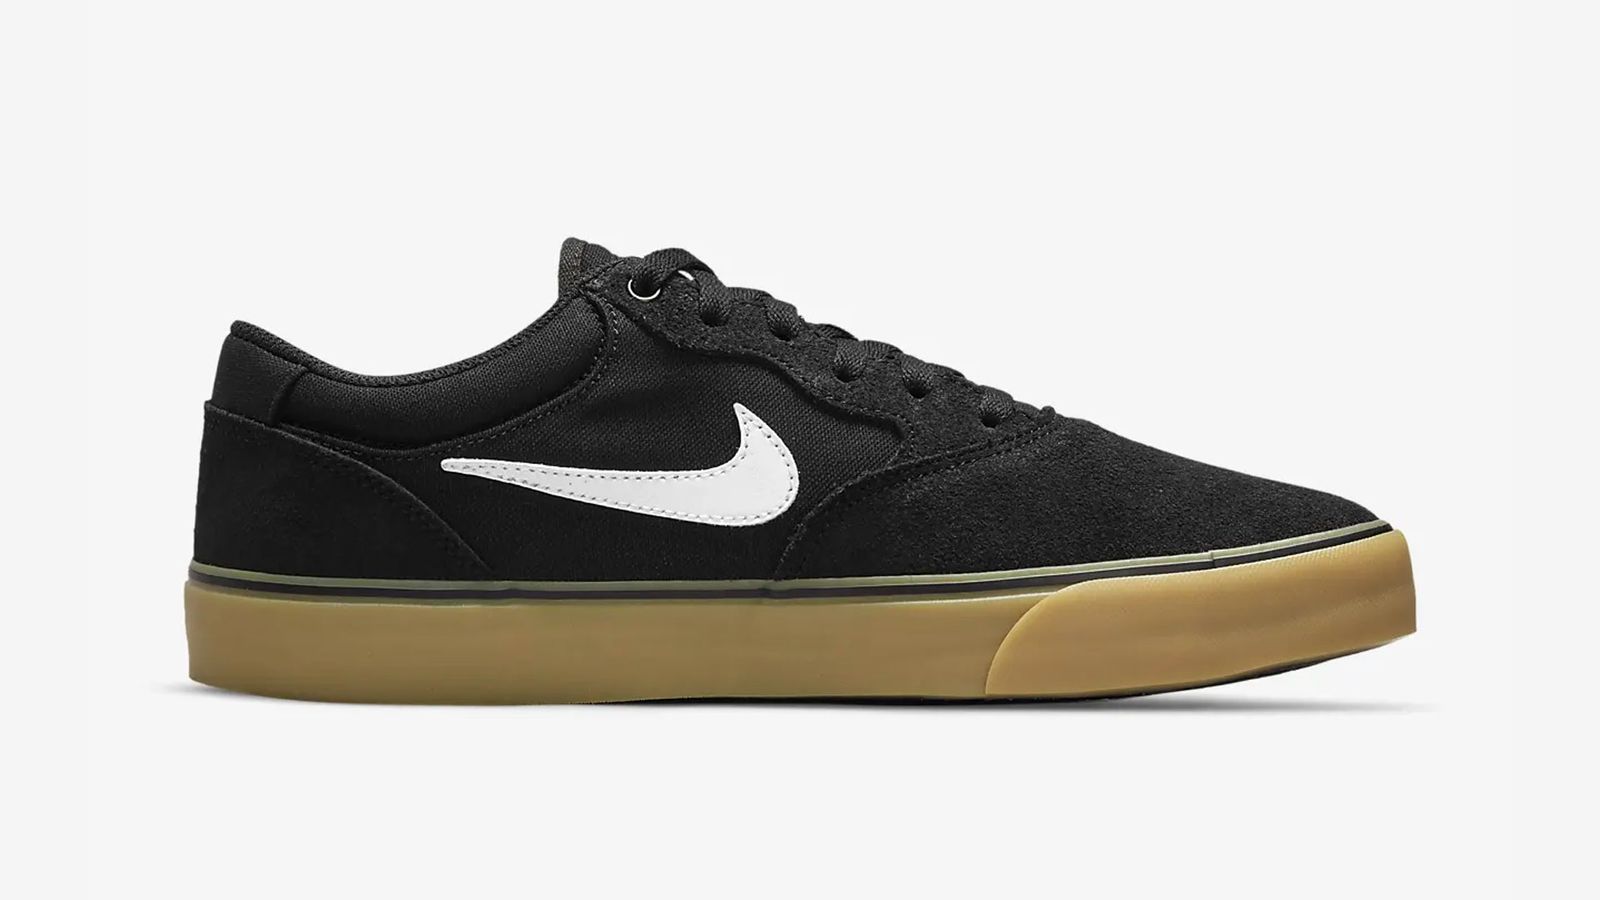 Nike SB Chron 2 product image of a black sneaker with white Swoosh and gum sole.